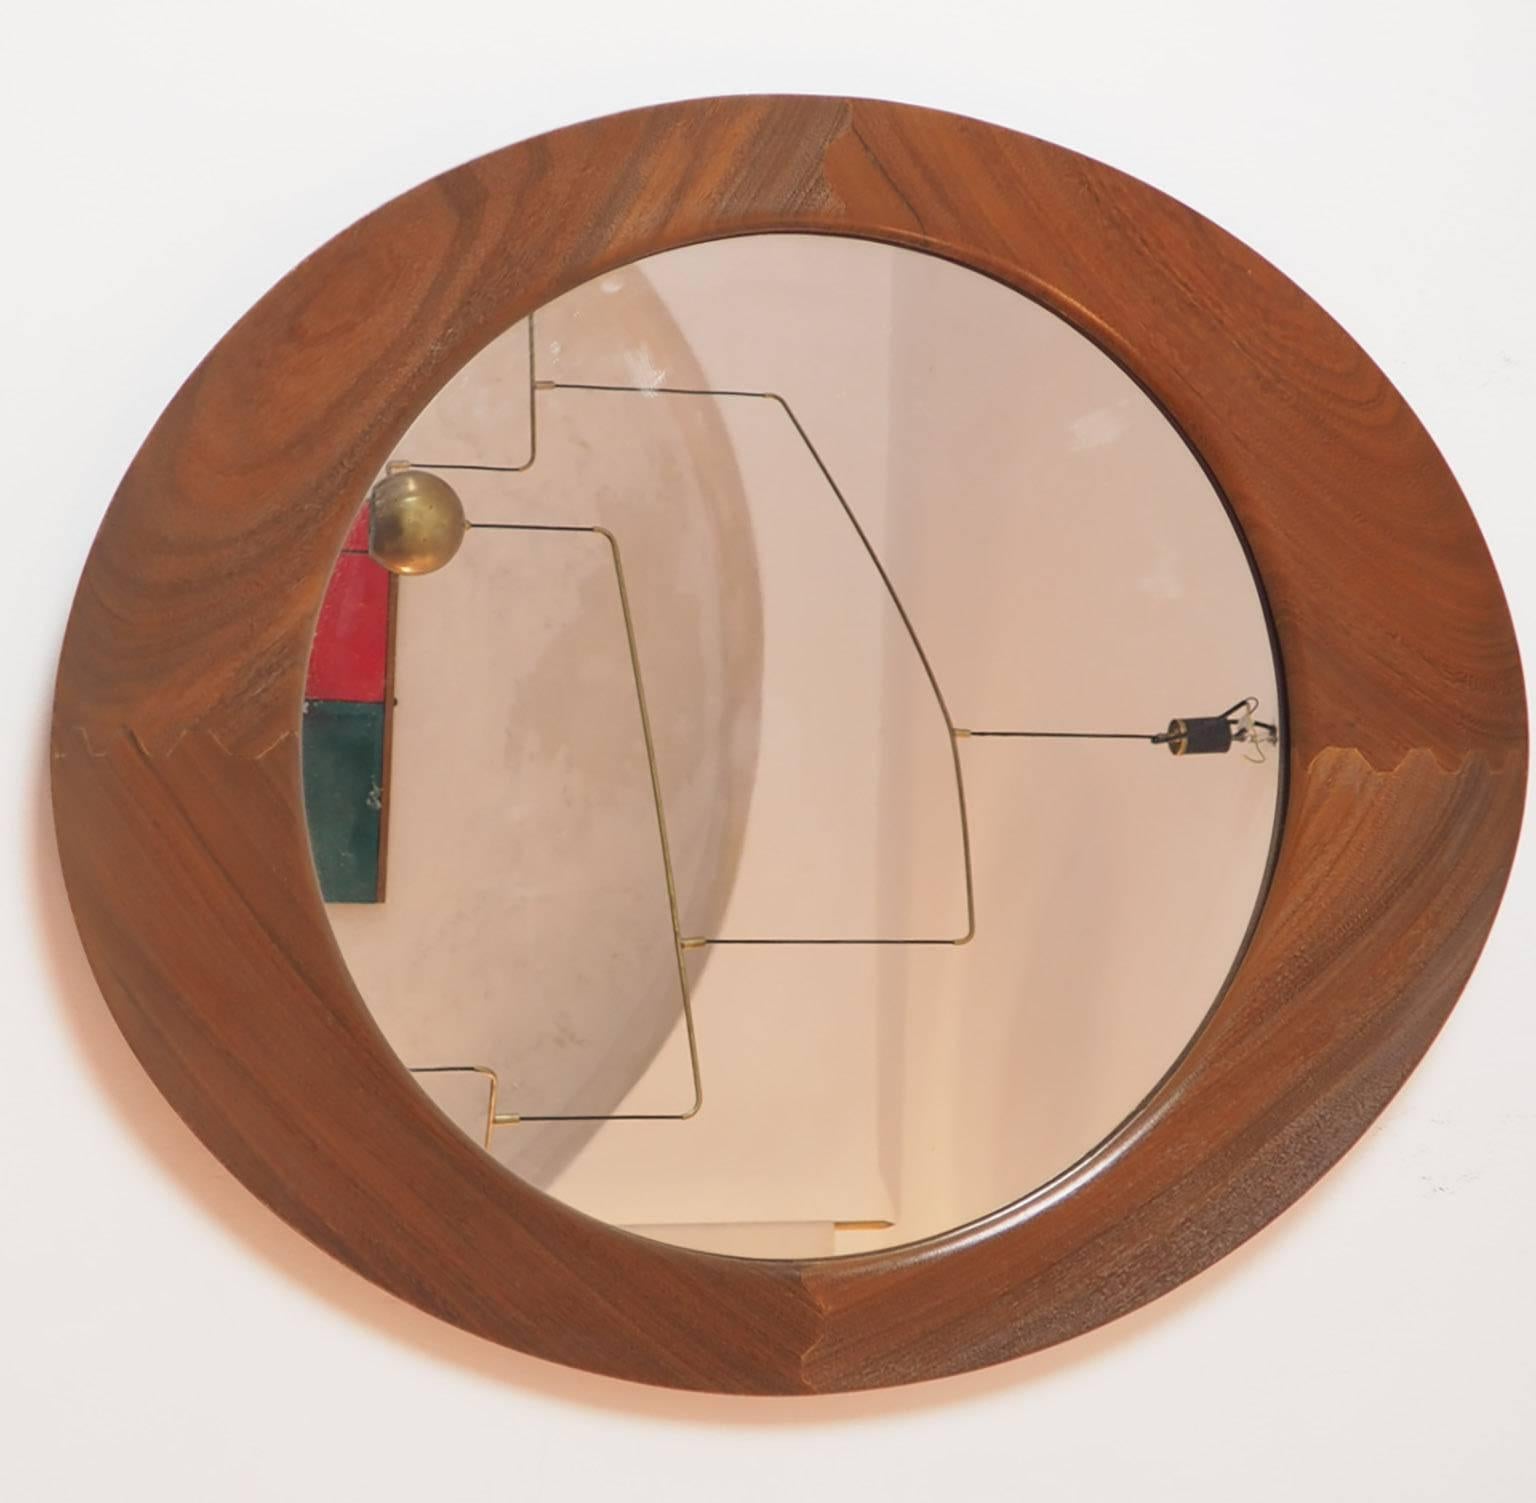 Beautiful and rare mirror designed by Franco Campo and Carlo Graffi for Home in the 1950s
Oval large teak massive frame, with round mirrored glass.
The wood frame has different thickness in the apical width;
Is beautiful both in the vertical or